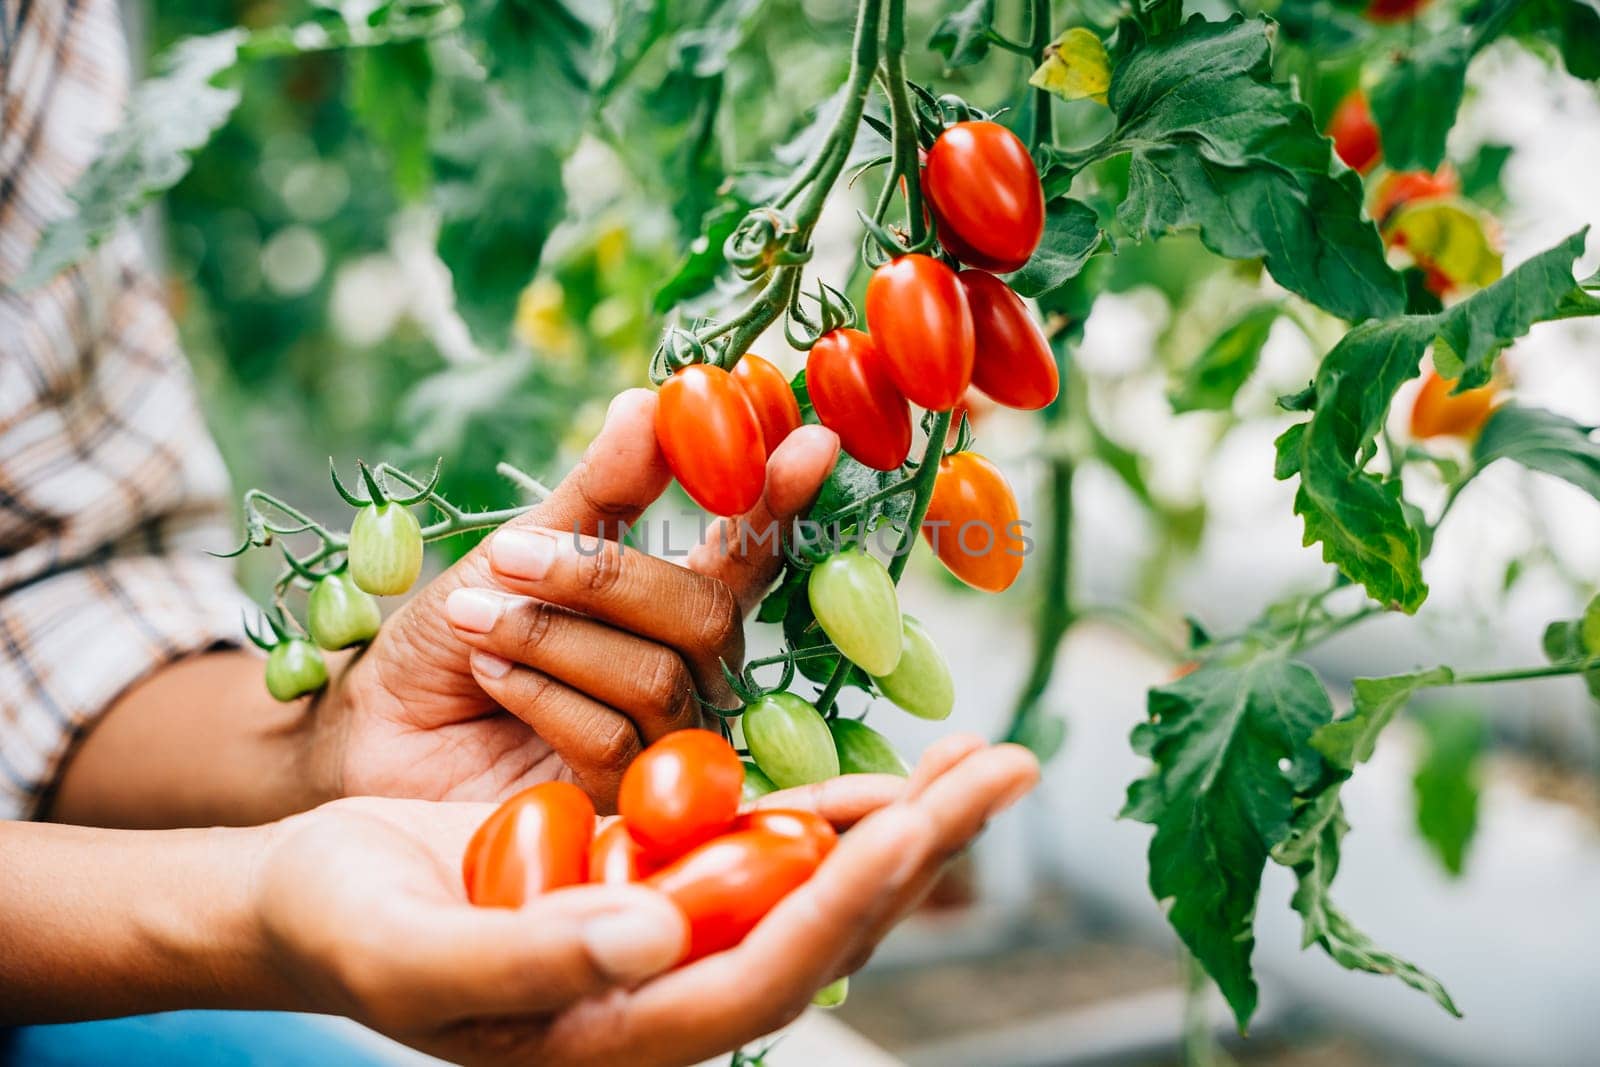 Close-up of farmer's hands gently holding cherry tomatoes in a greenhouse. Quality harvest exhibits meticulous growth care. Nature's lush outdoors convey abundance.